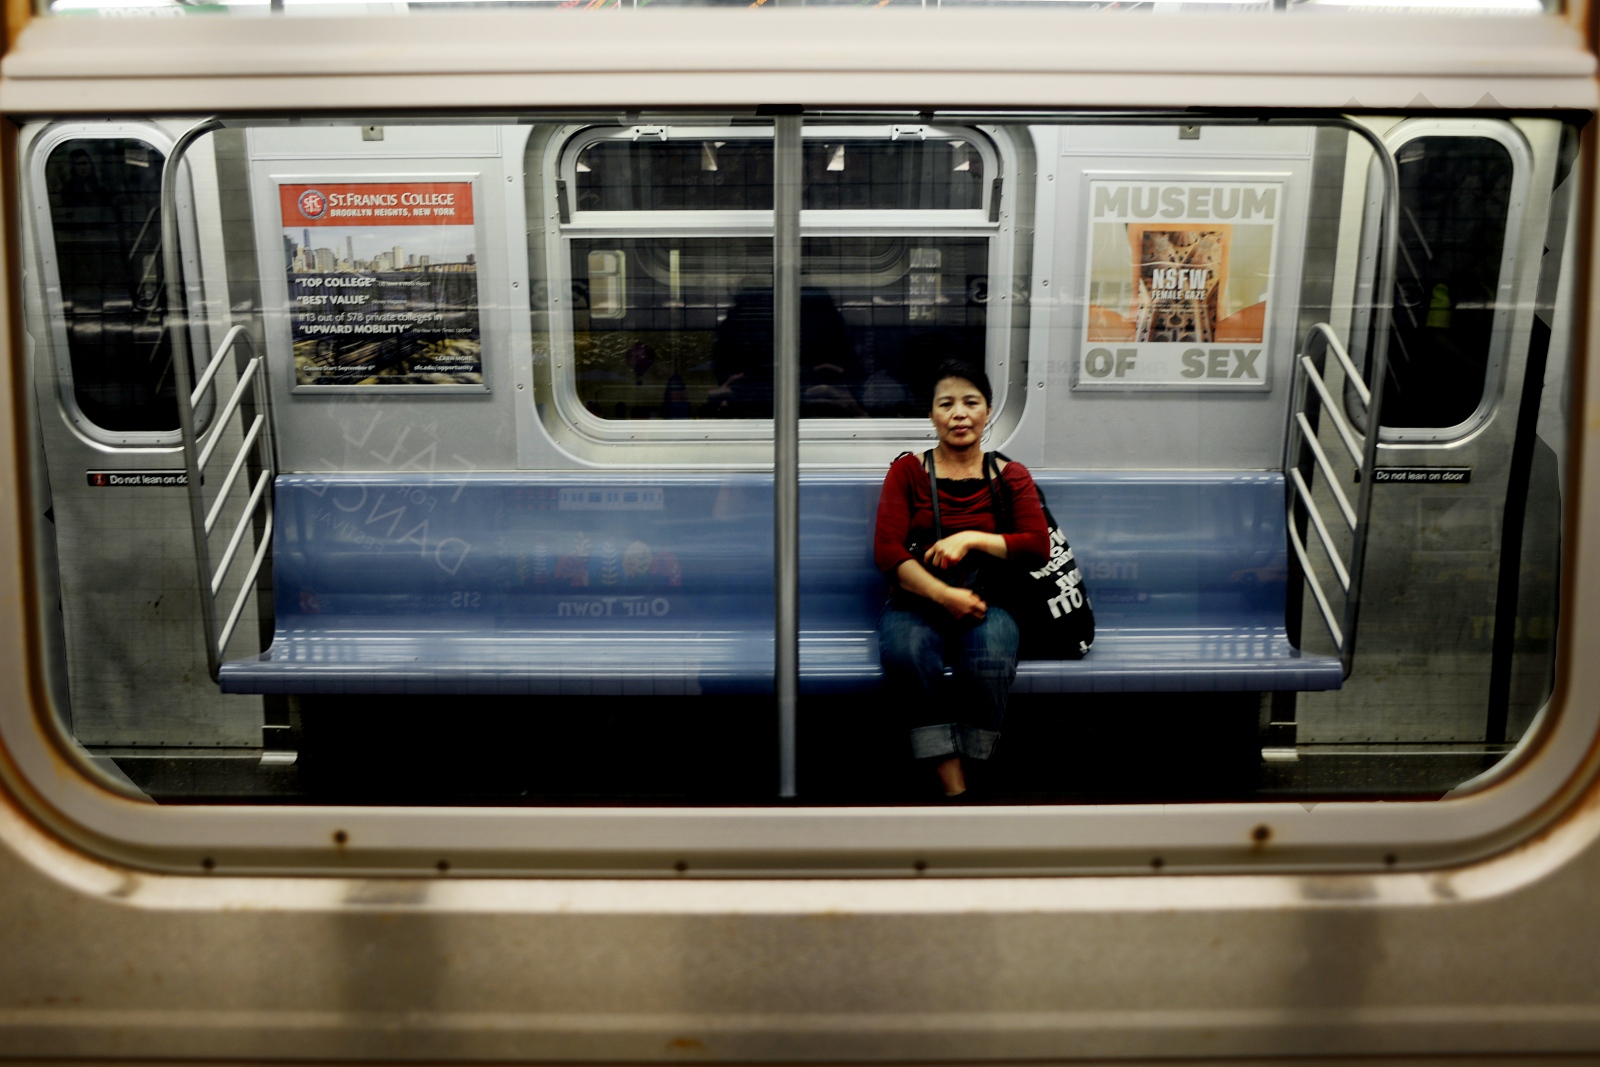 "In short, I was a slave" - Edith Mendoza, 51, heads home on the E train after work...